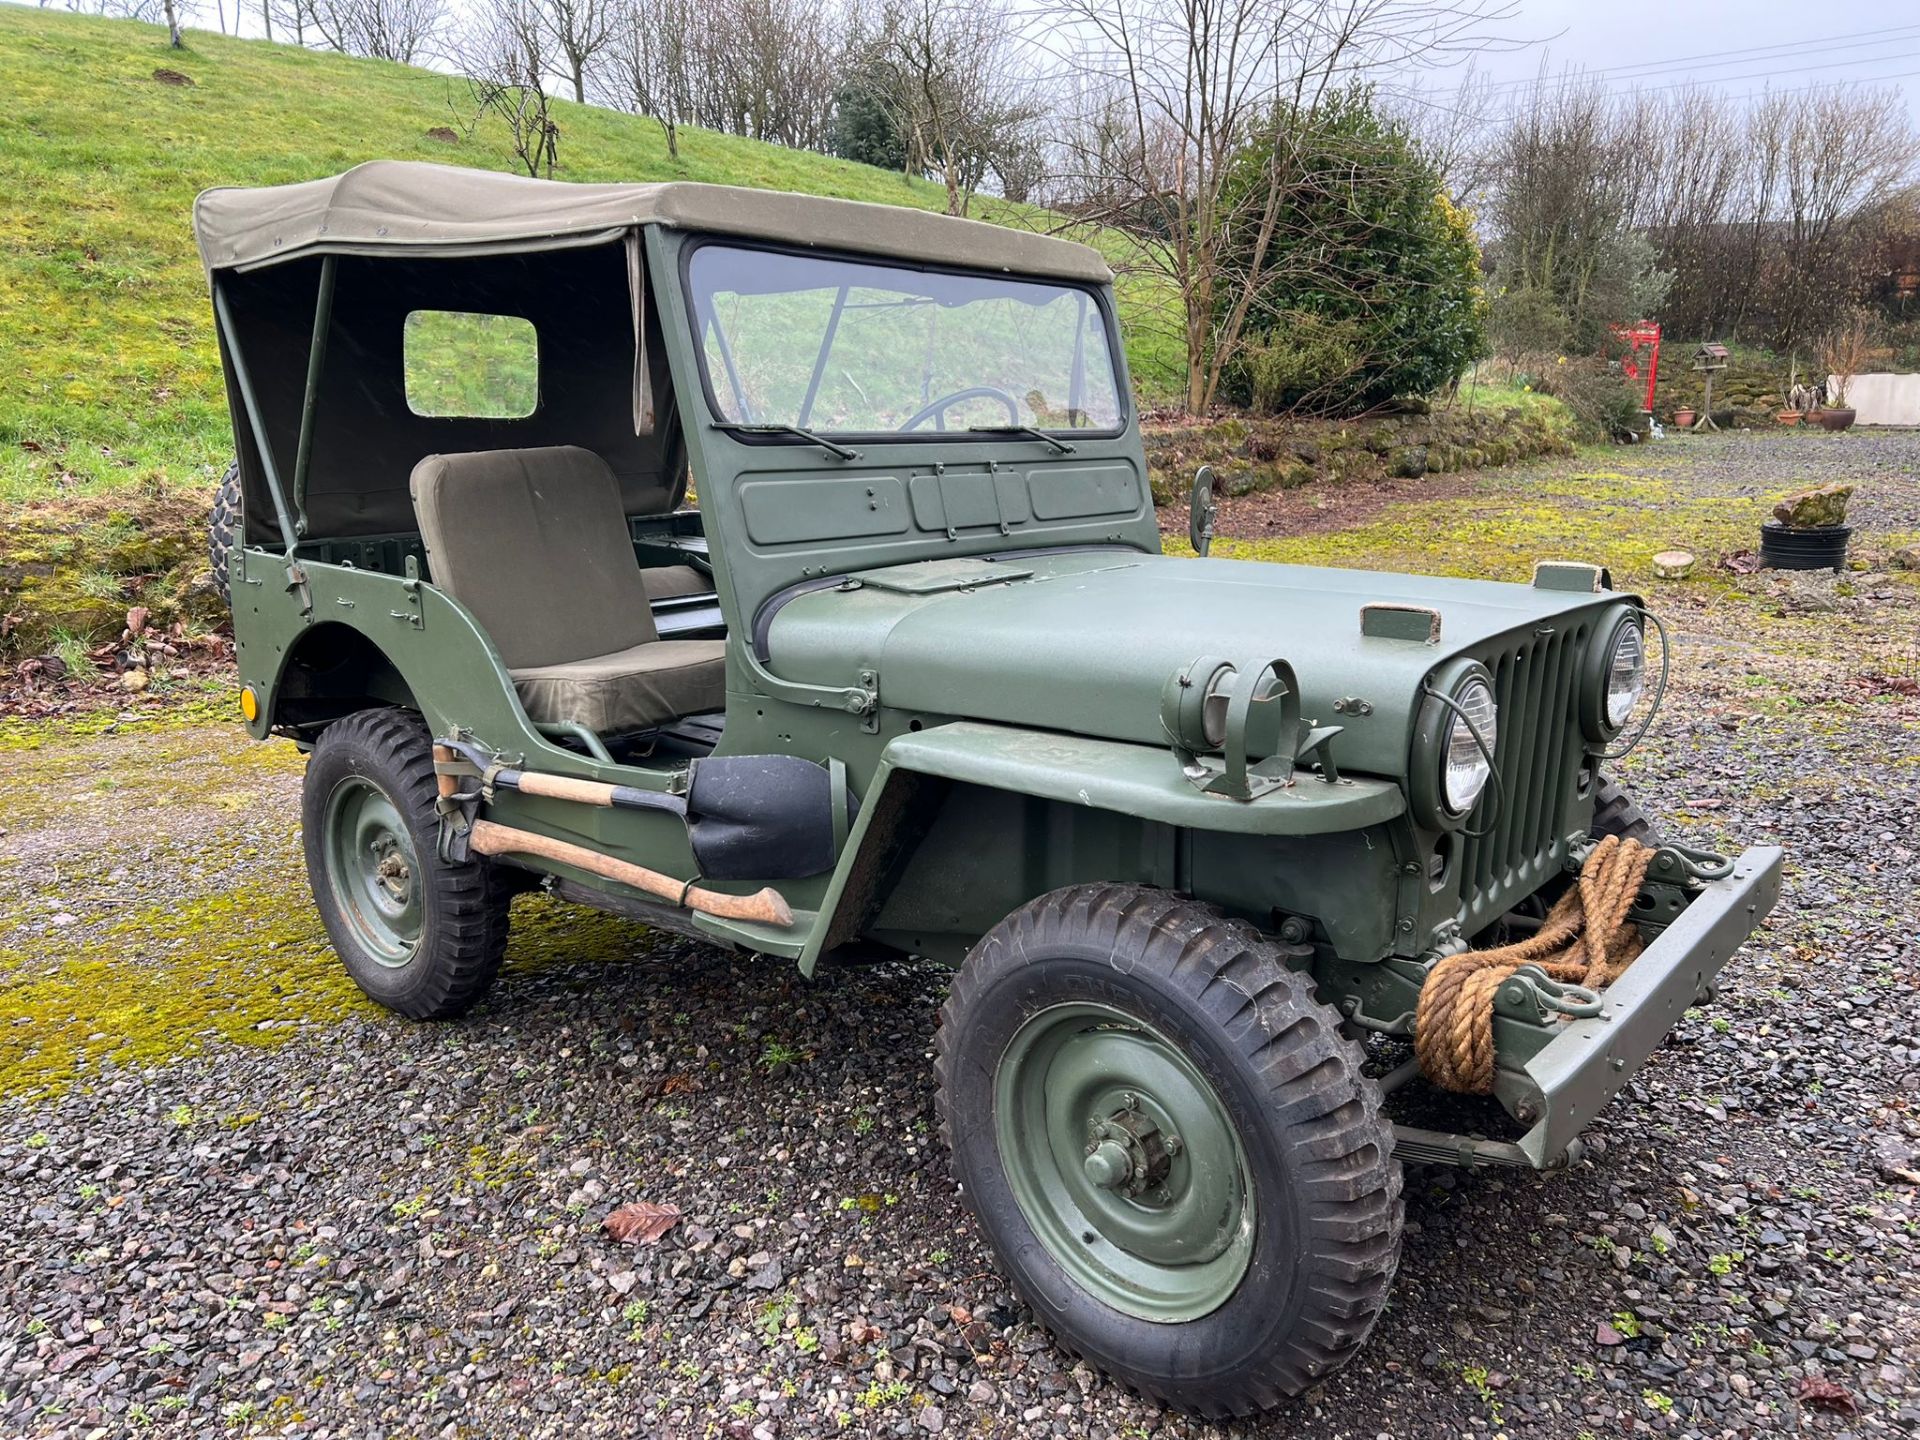 Willys Jeep Model M38 1945 - Image 2 of 13